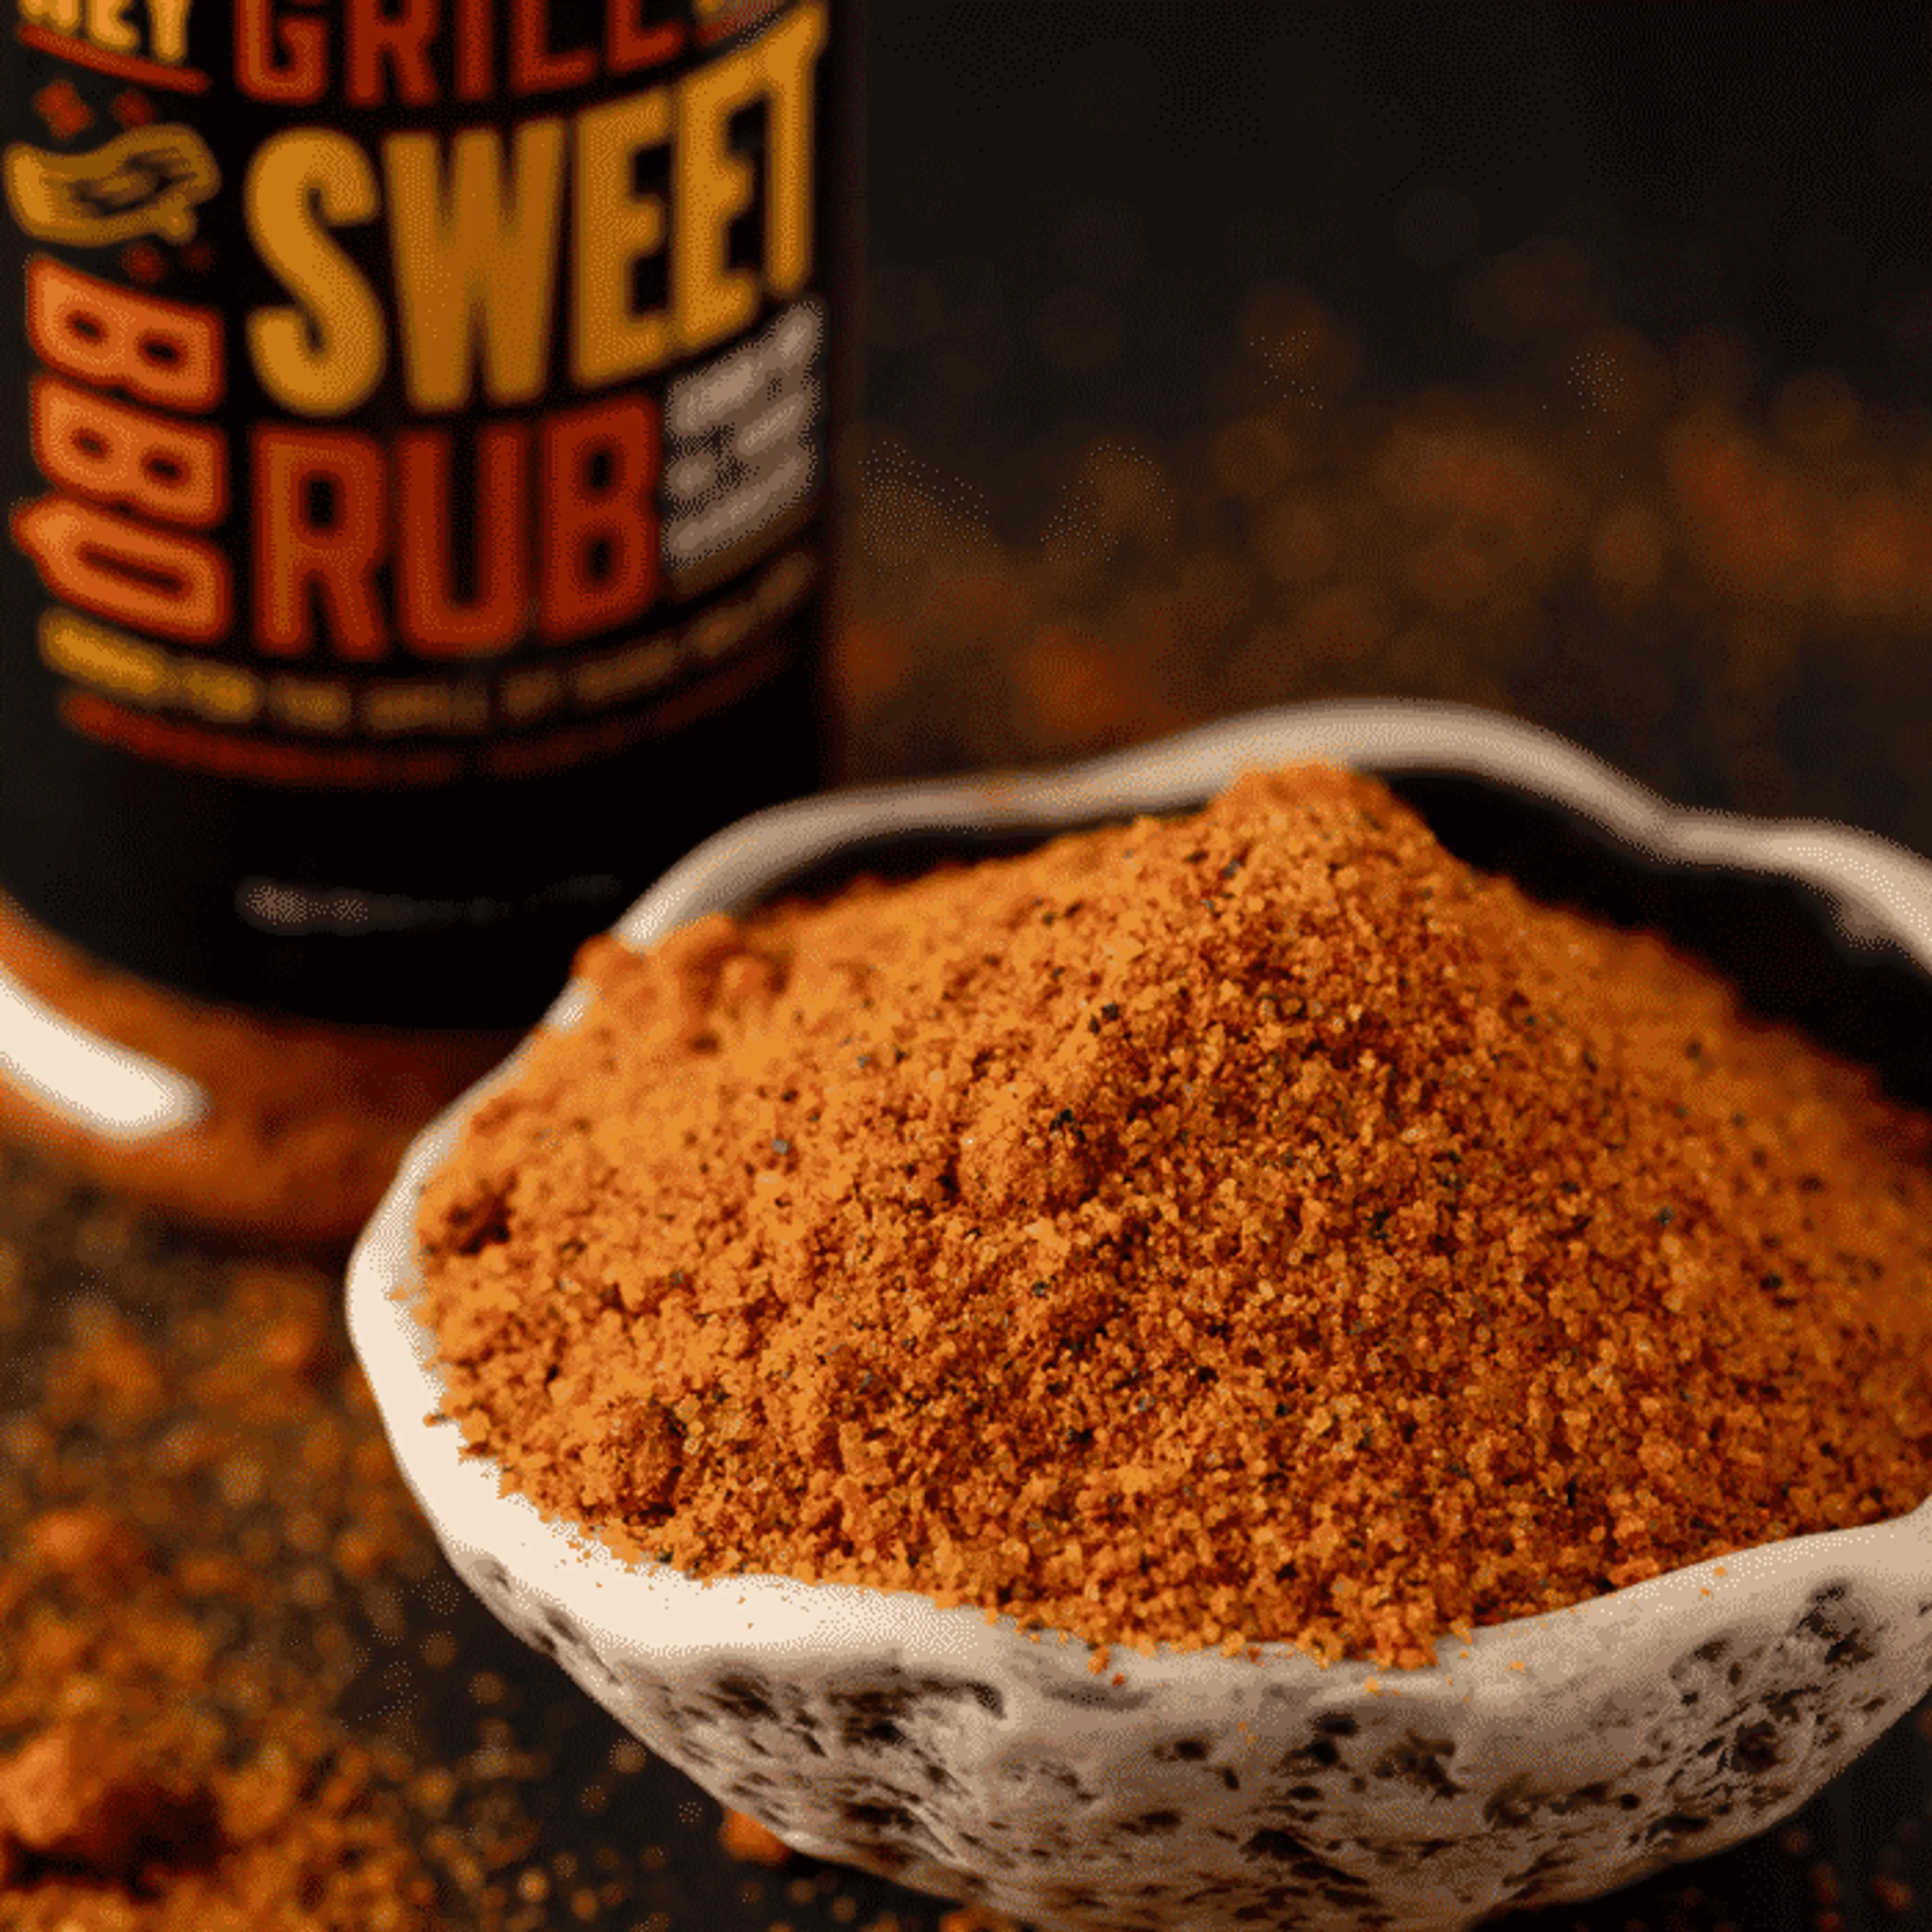 The BEST Sweet Rub for Pork and Chicken